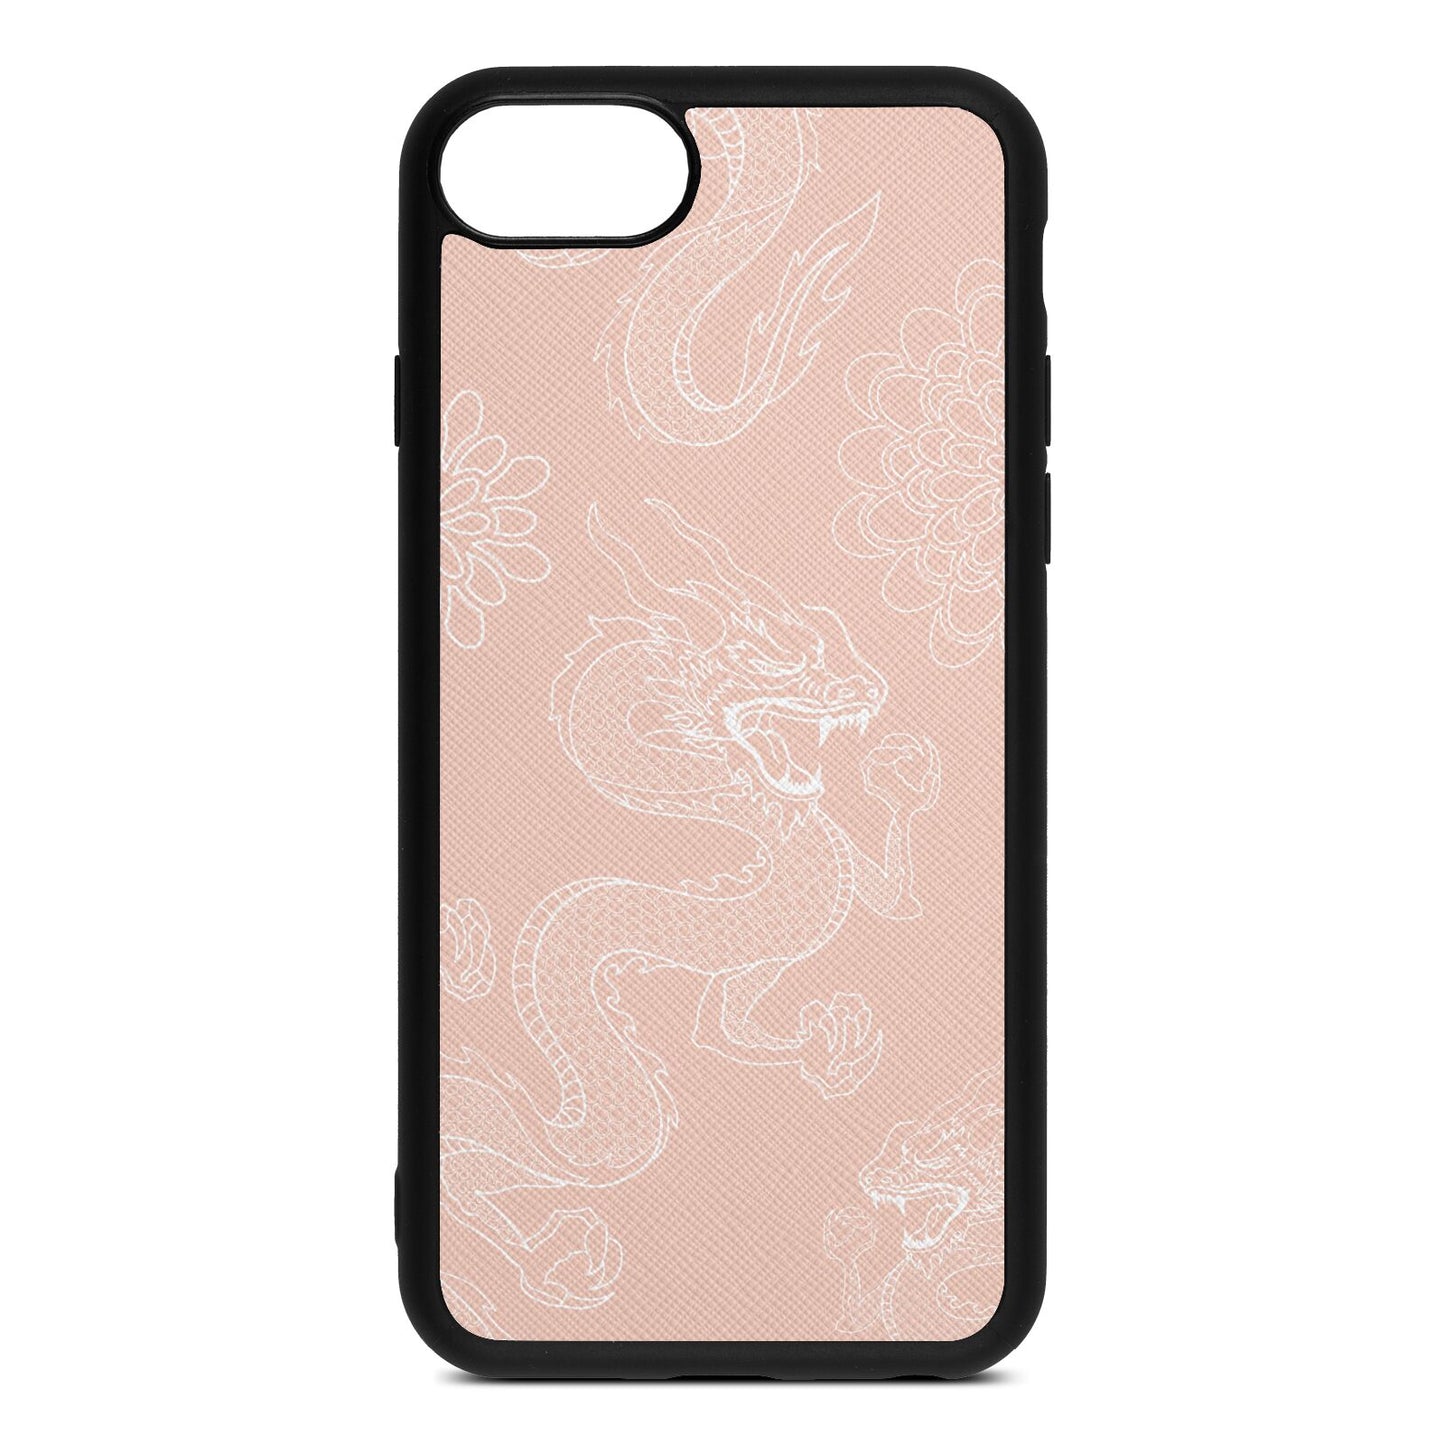 Dragons Nude Saffiano Leather iPhone 8 Case